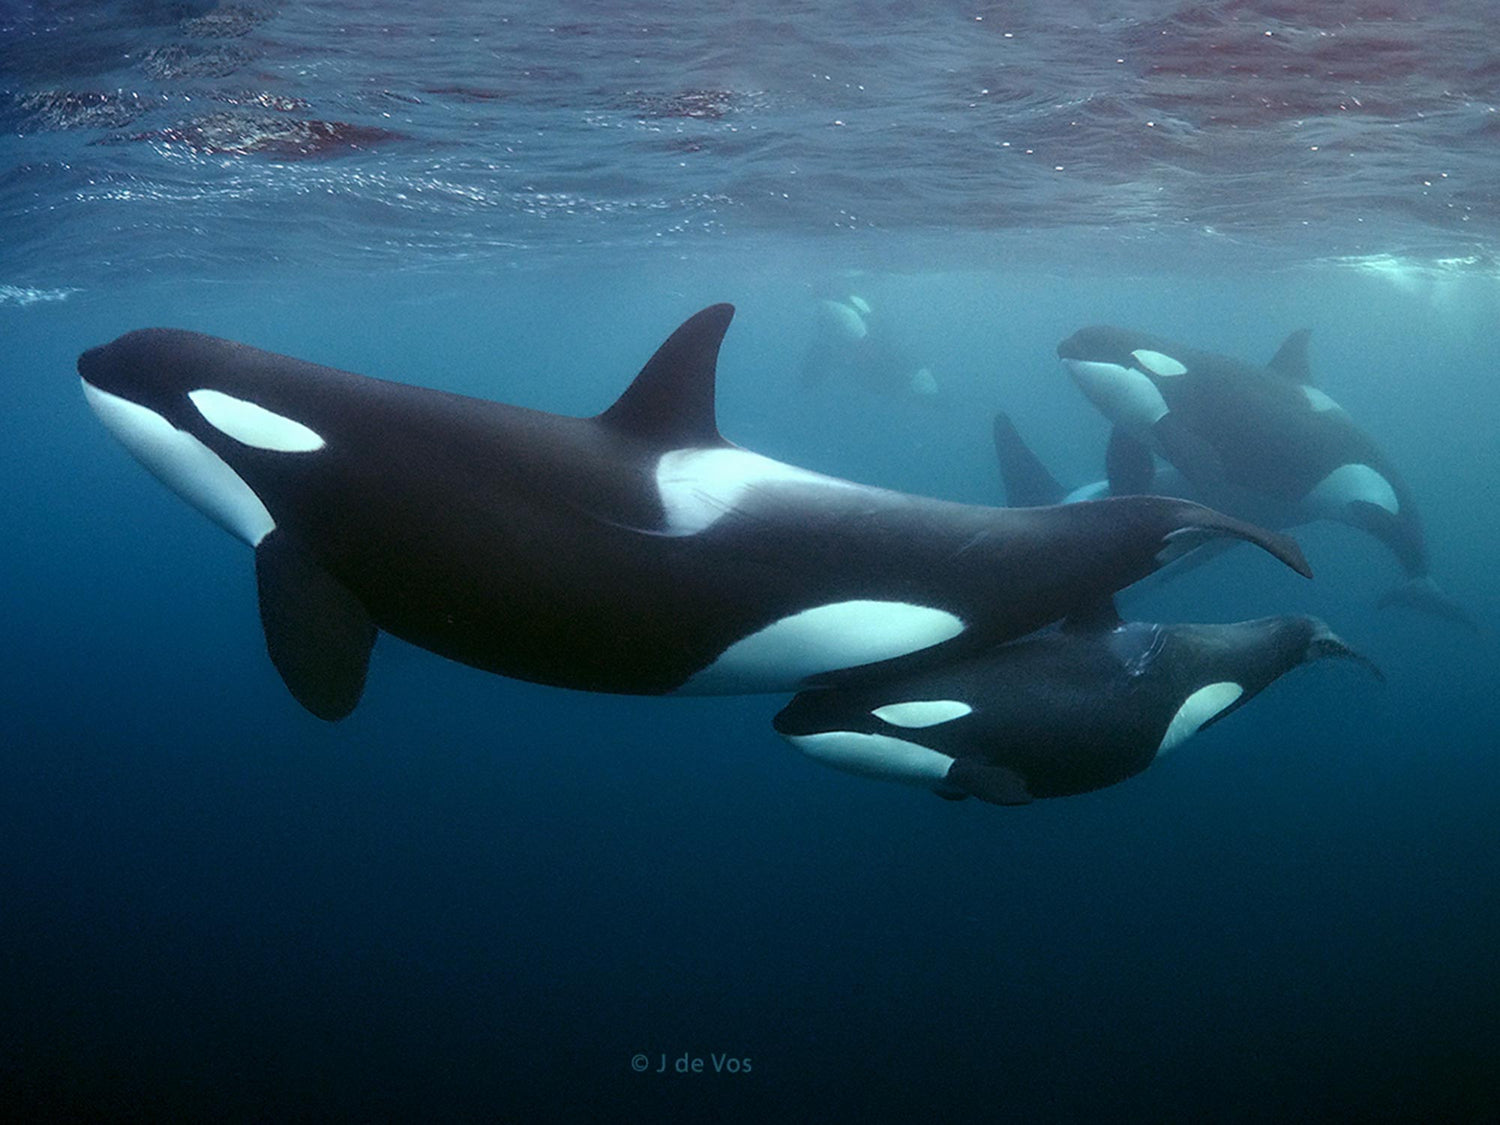 Expedition | Freedive with Orcas & Humpback Whales | October - December 2022